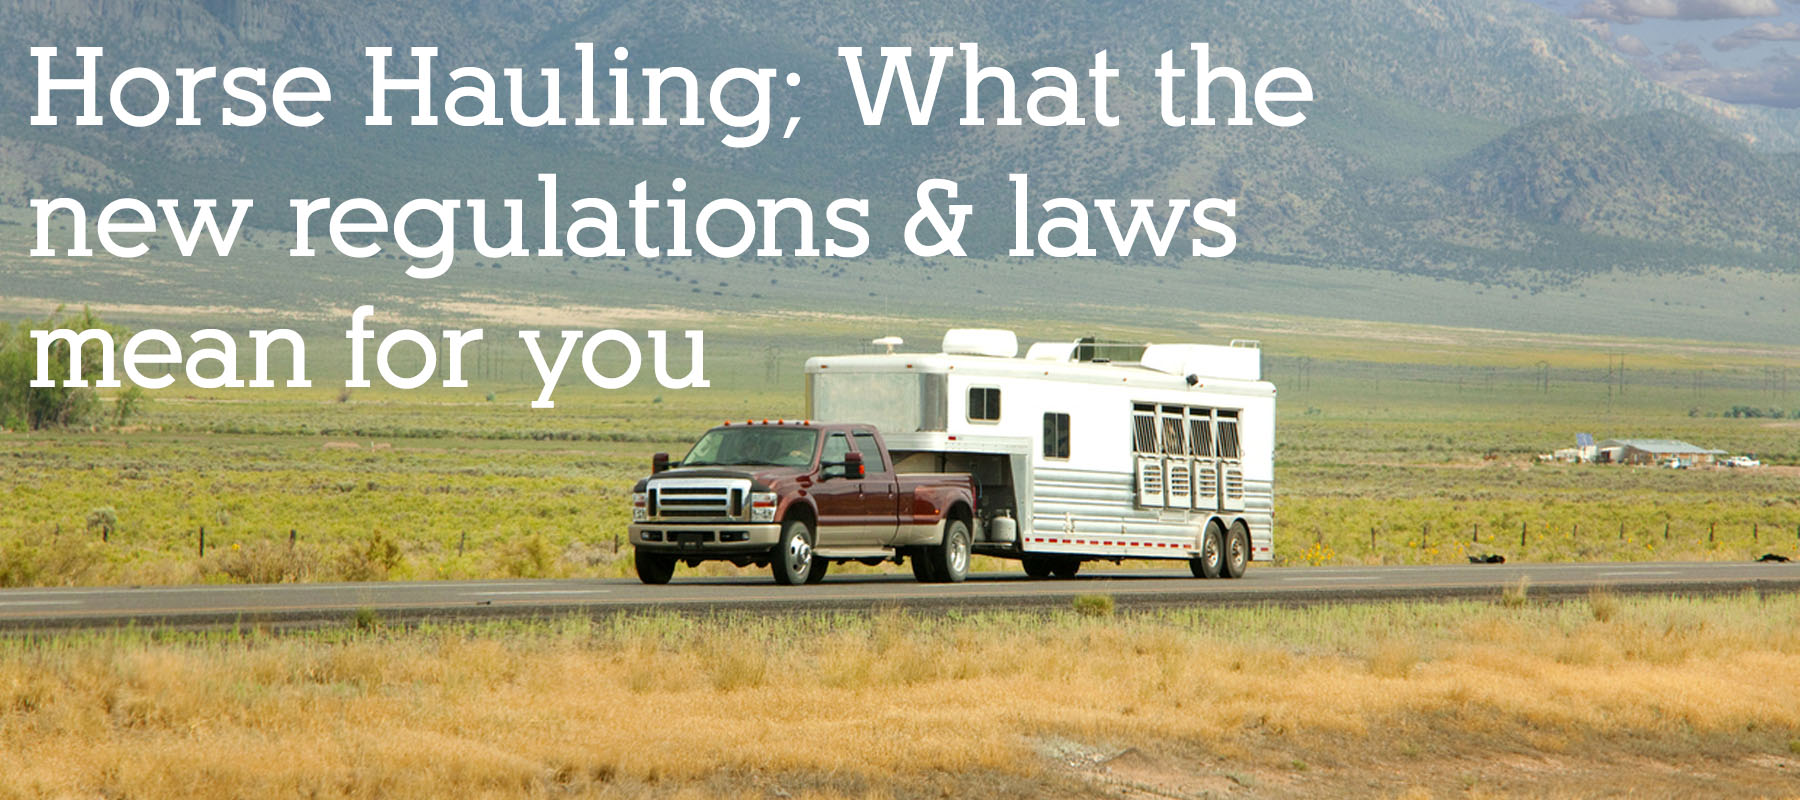 Horse Hauling; What the new regulations & laws mean for you